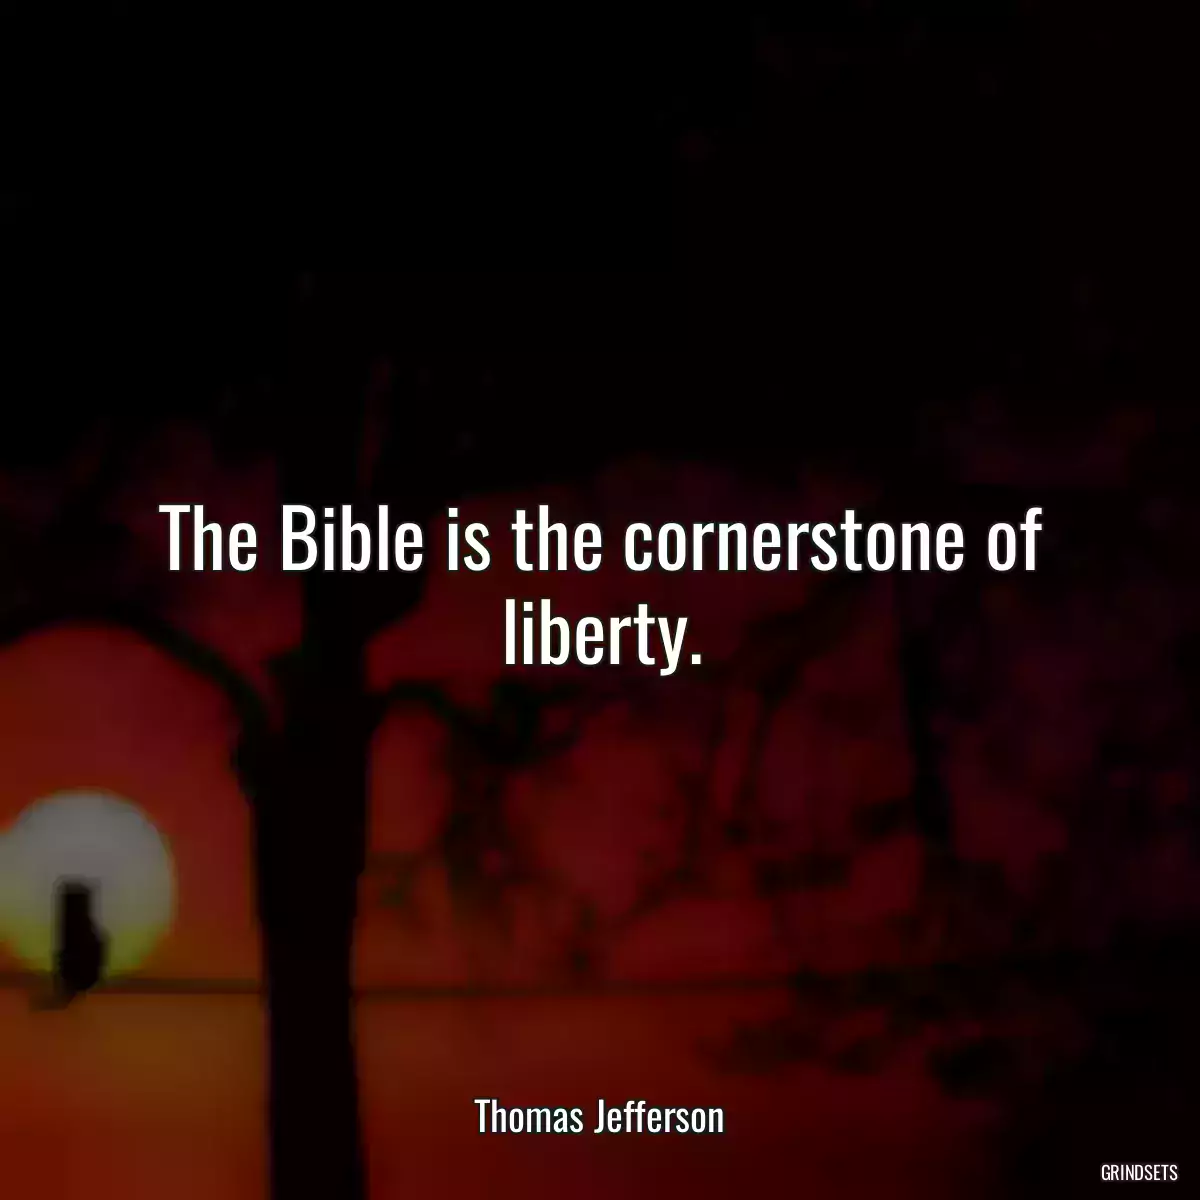 The Bible is the cornerstone of liberty.